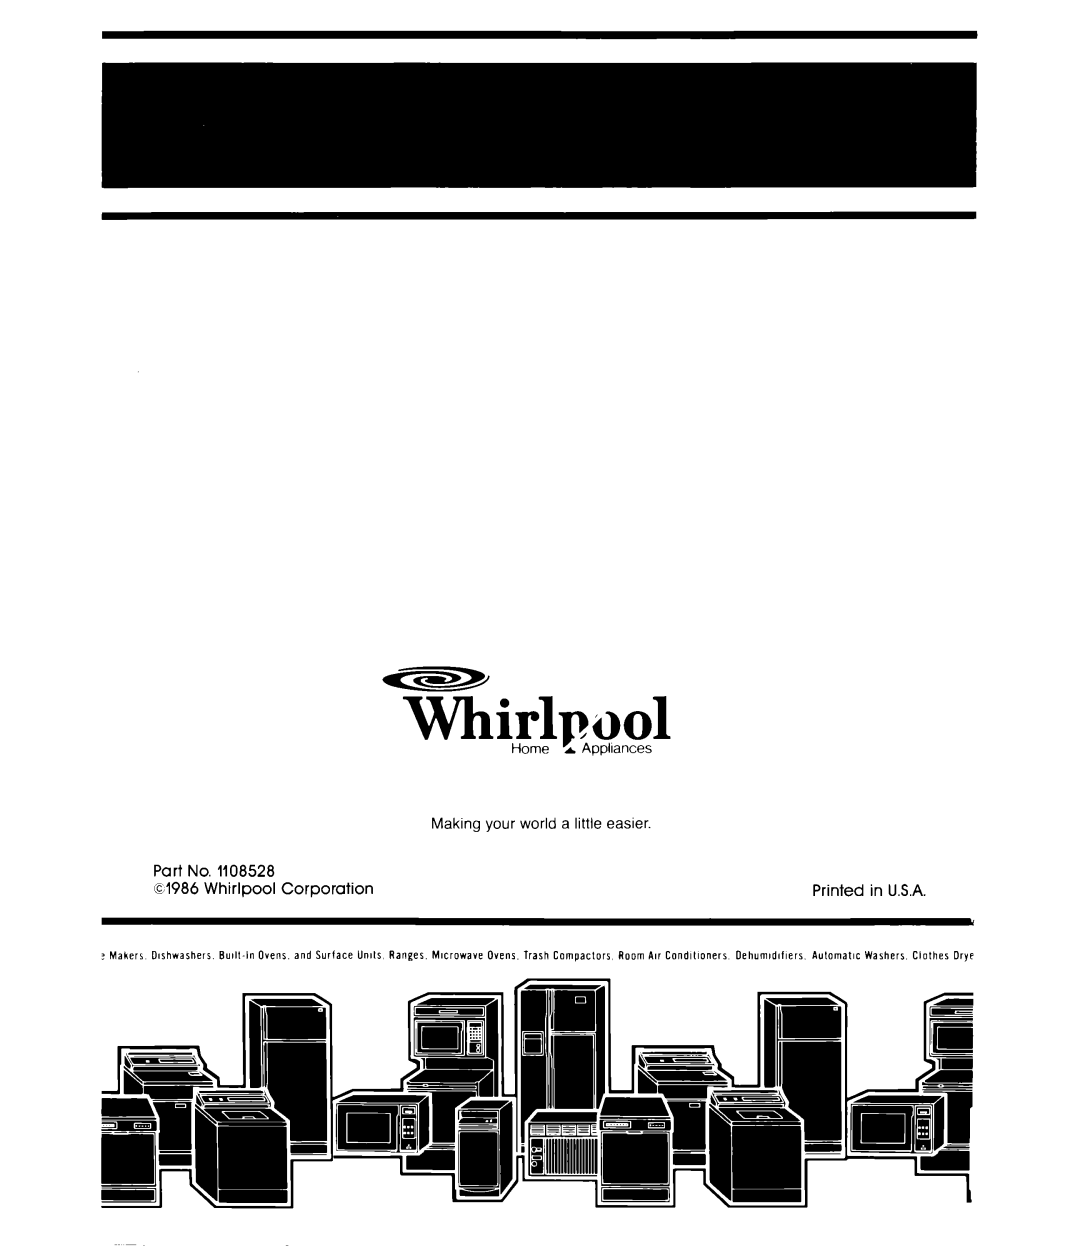 Whirlpool ET12AK manual Making your world a little easier, Part, Whirlpool, Corporation, Printed, in U.S.A, 1108528, cl986 